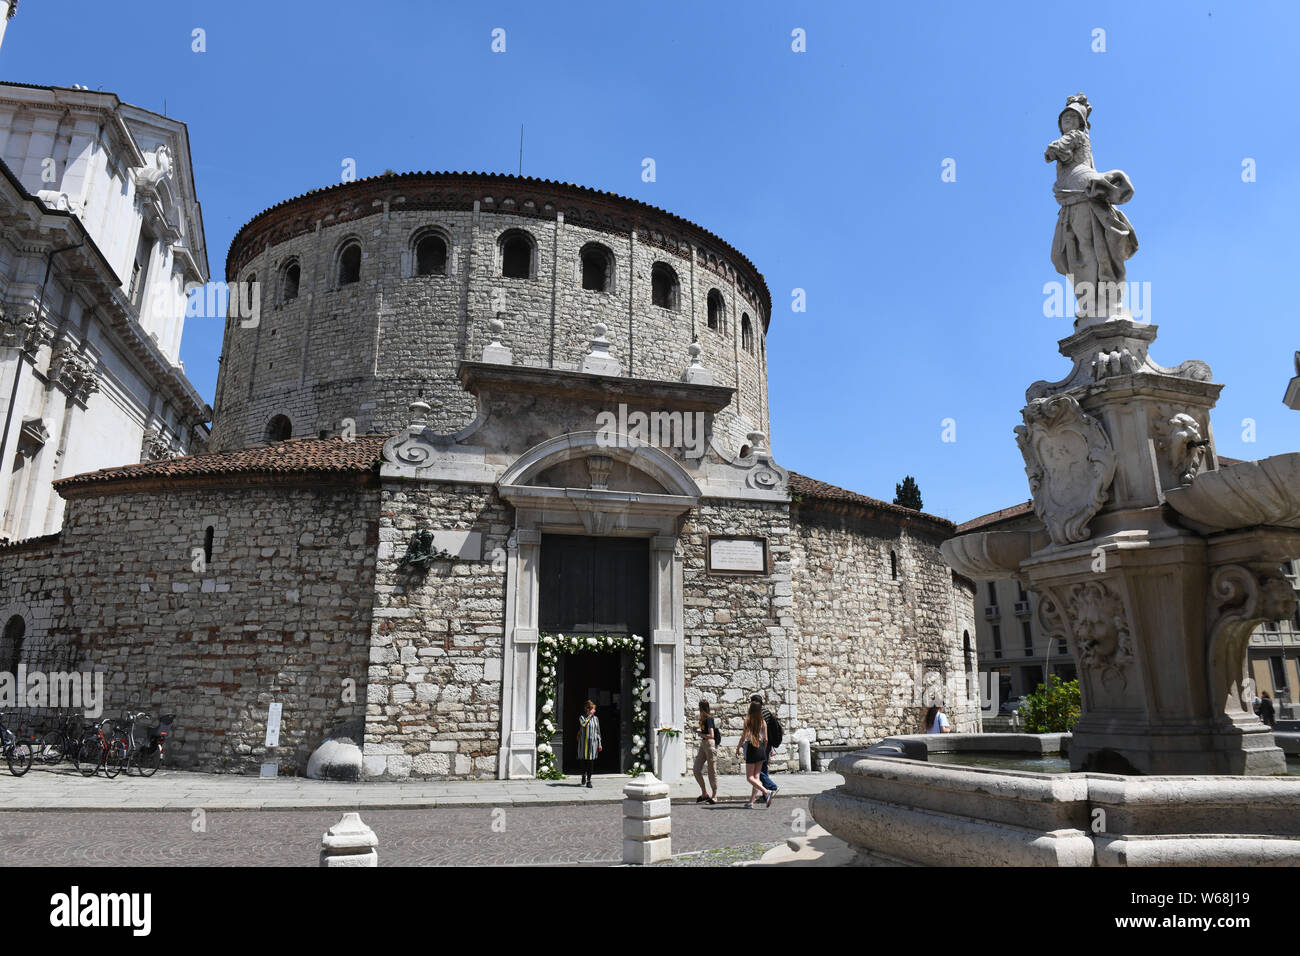 Paolo Vi High Resolution Stock Photography and Images - Alamy